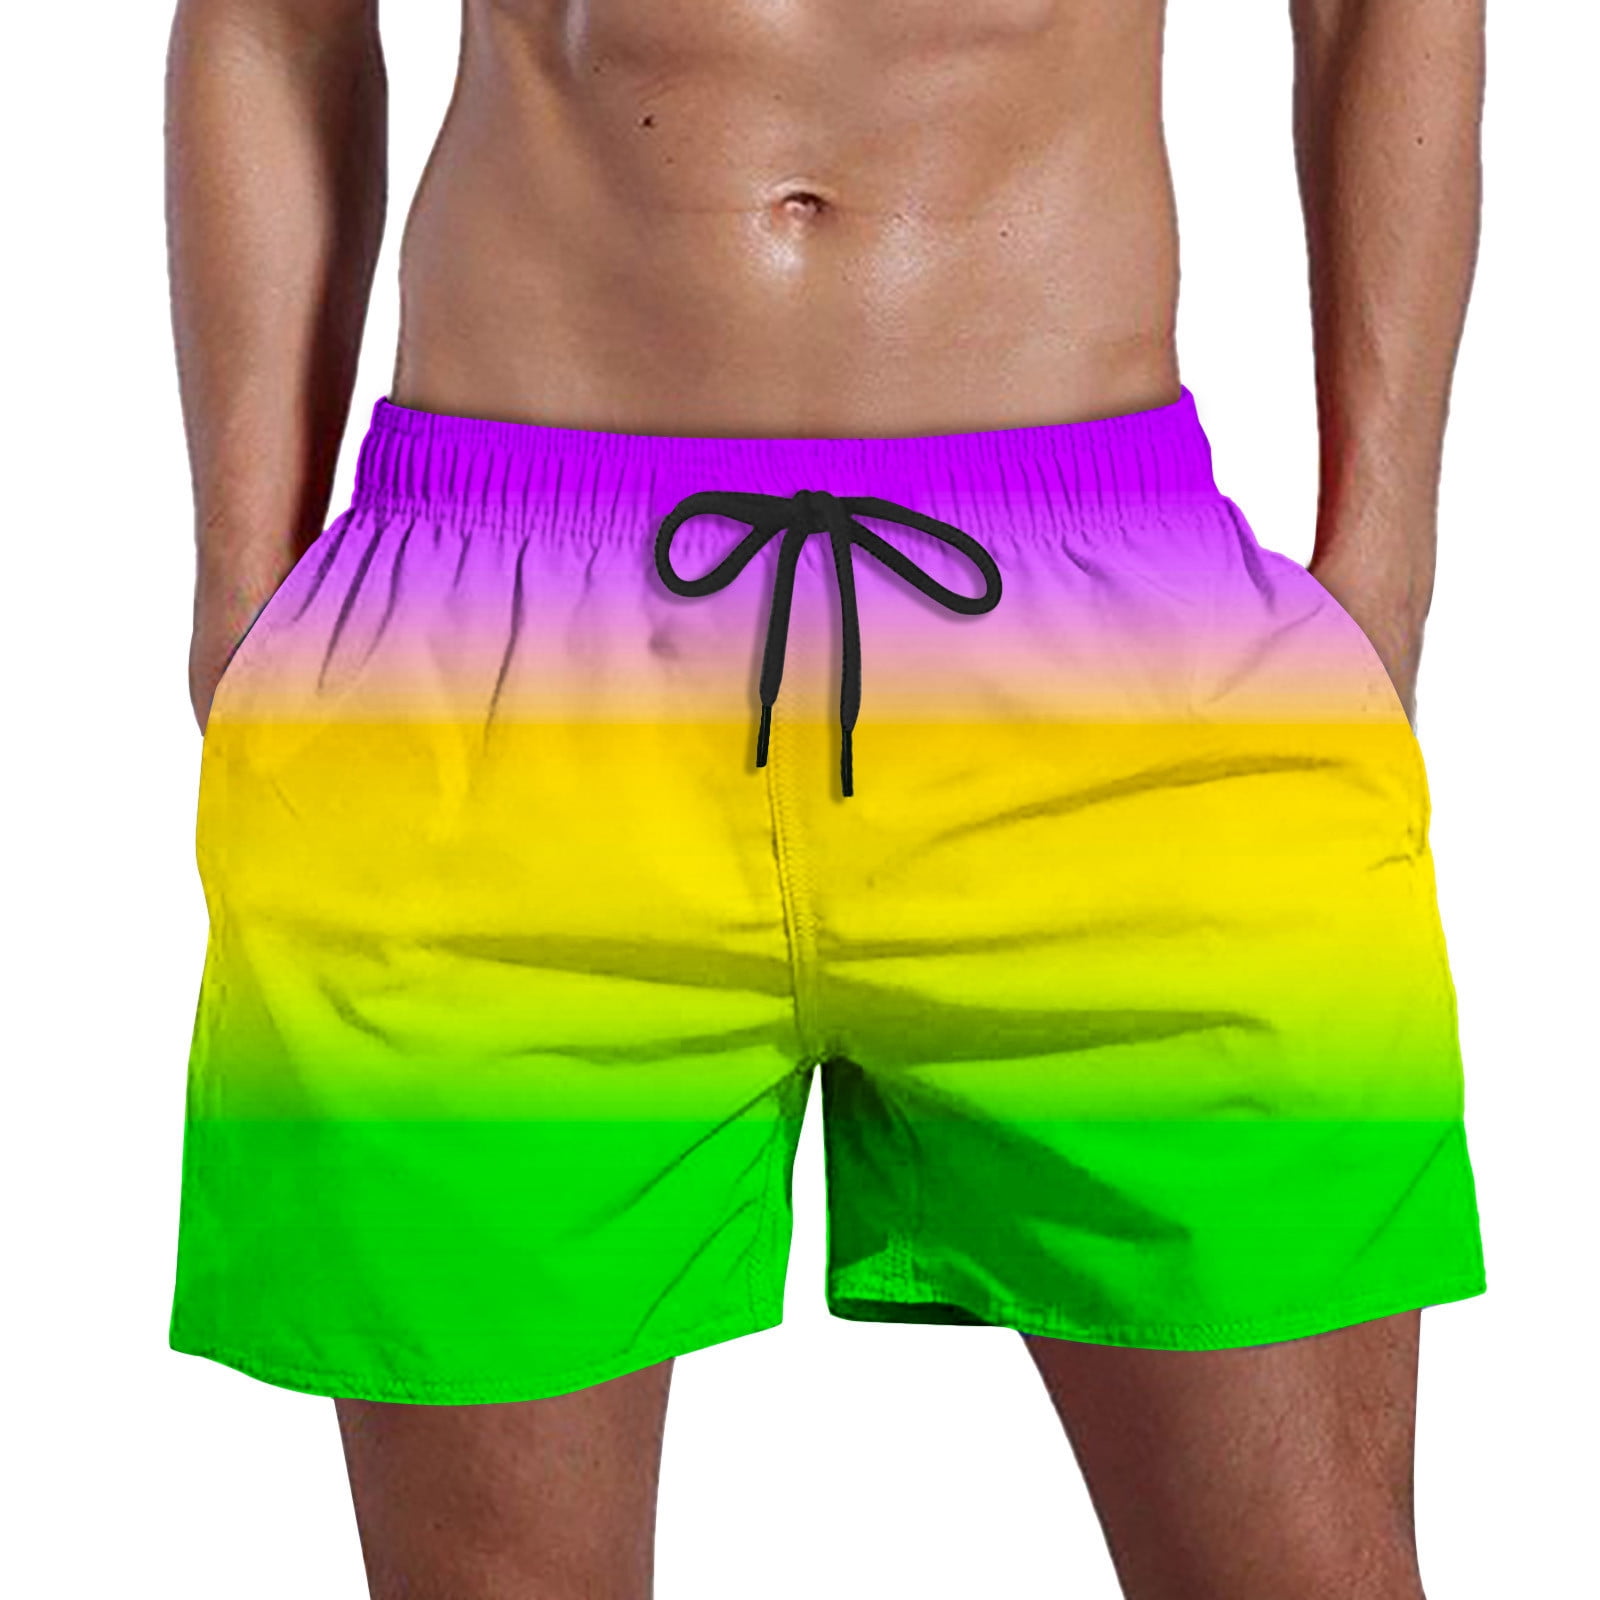 APEXFWDT Men's Swim Trunks Bathing Suit Big and Tall Board Shorts ...